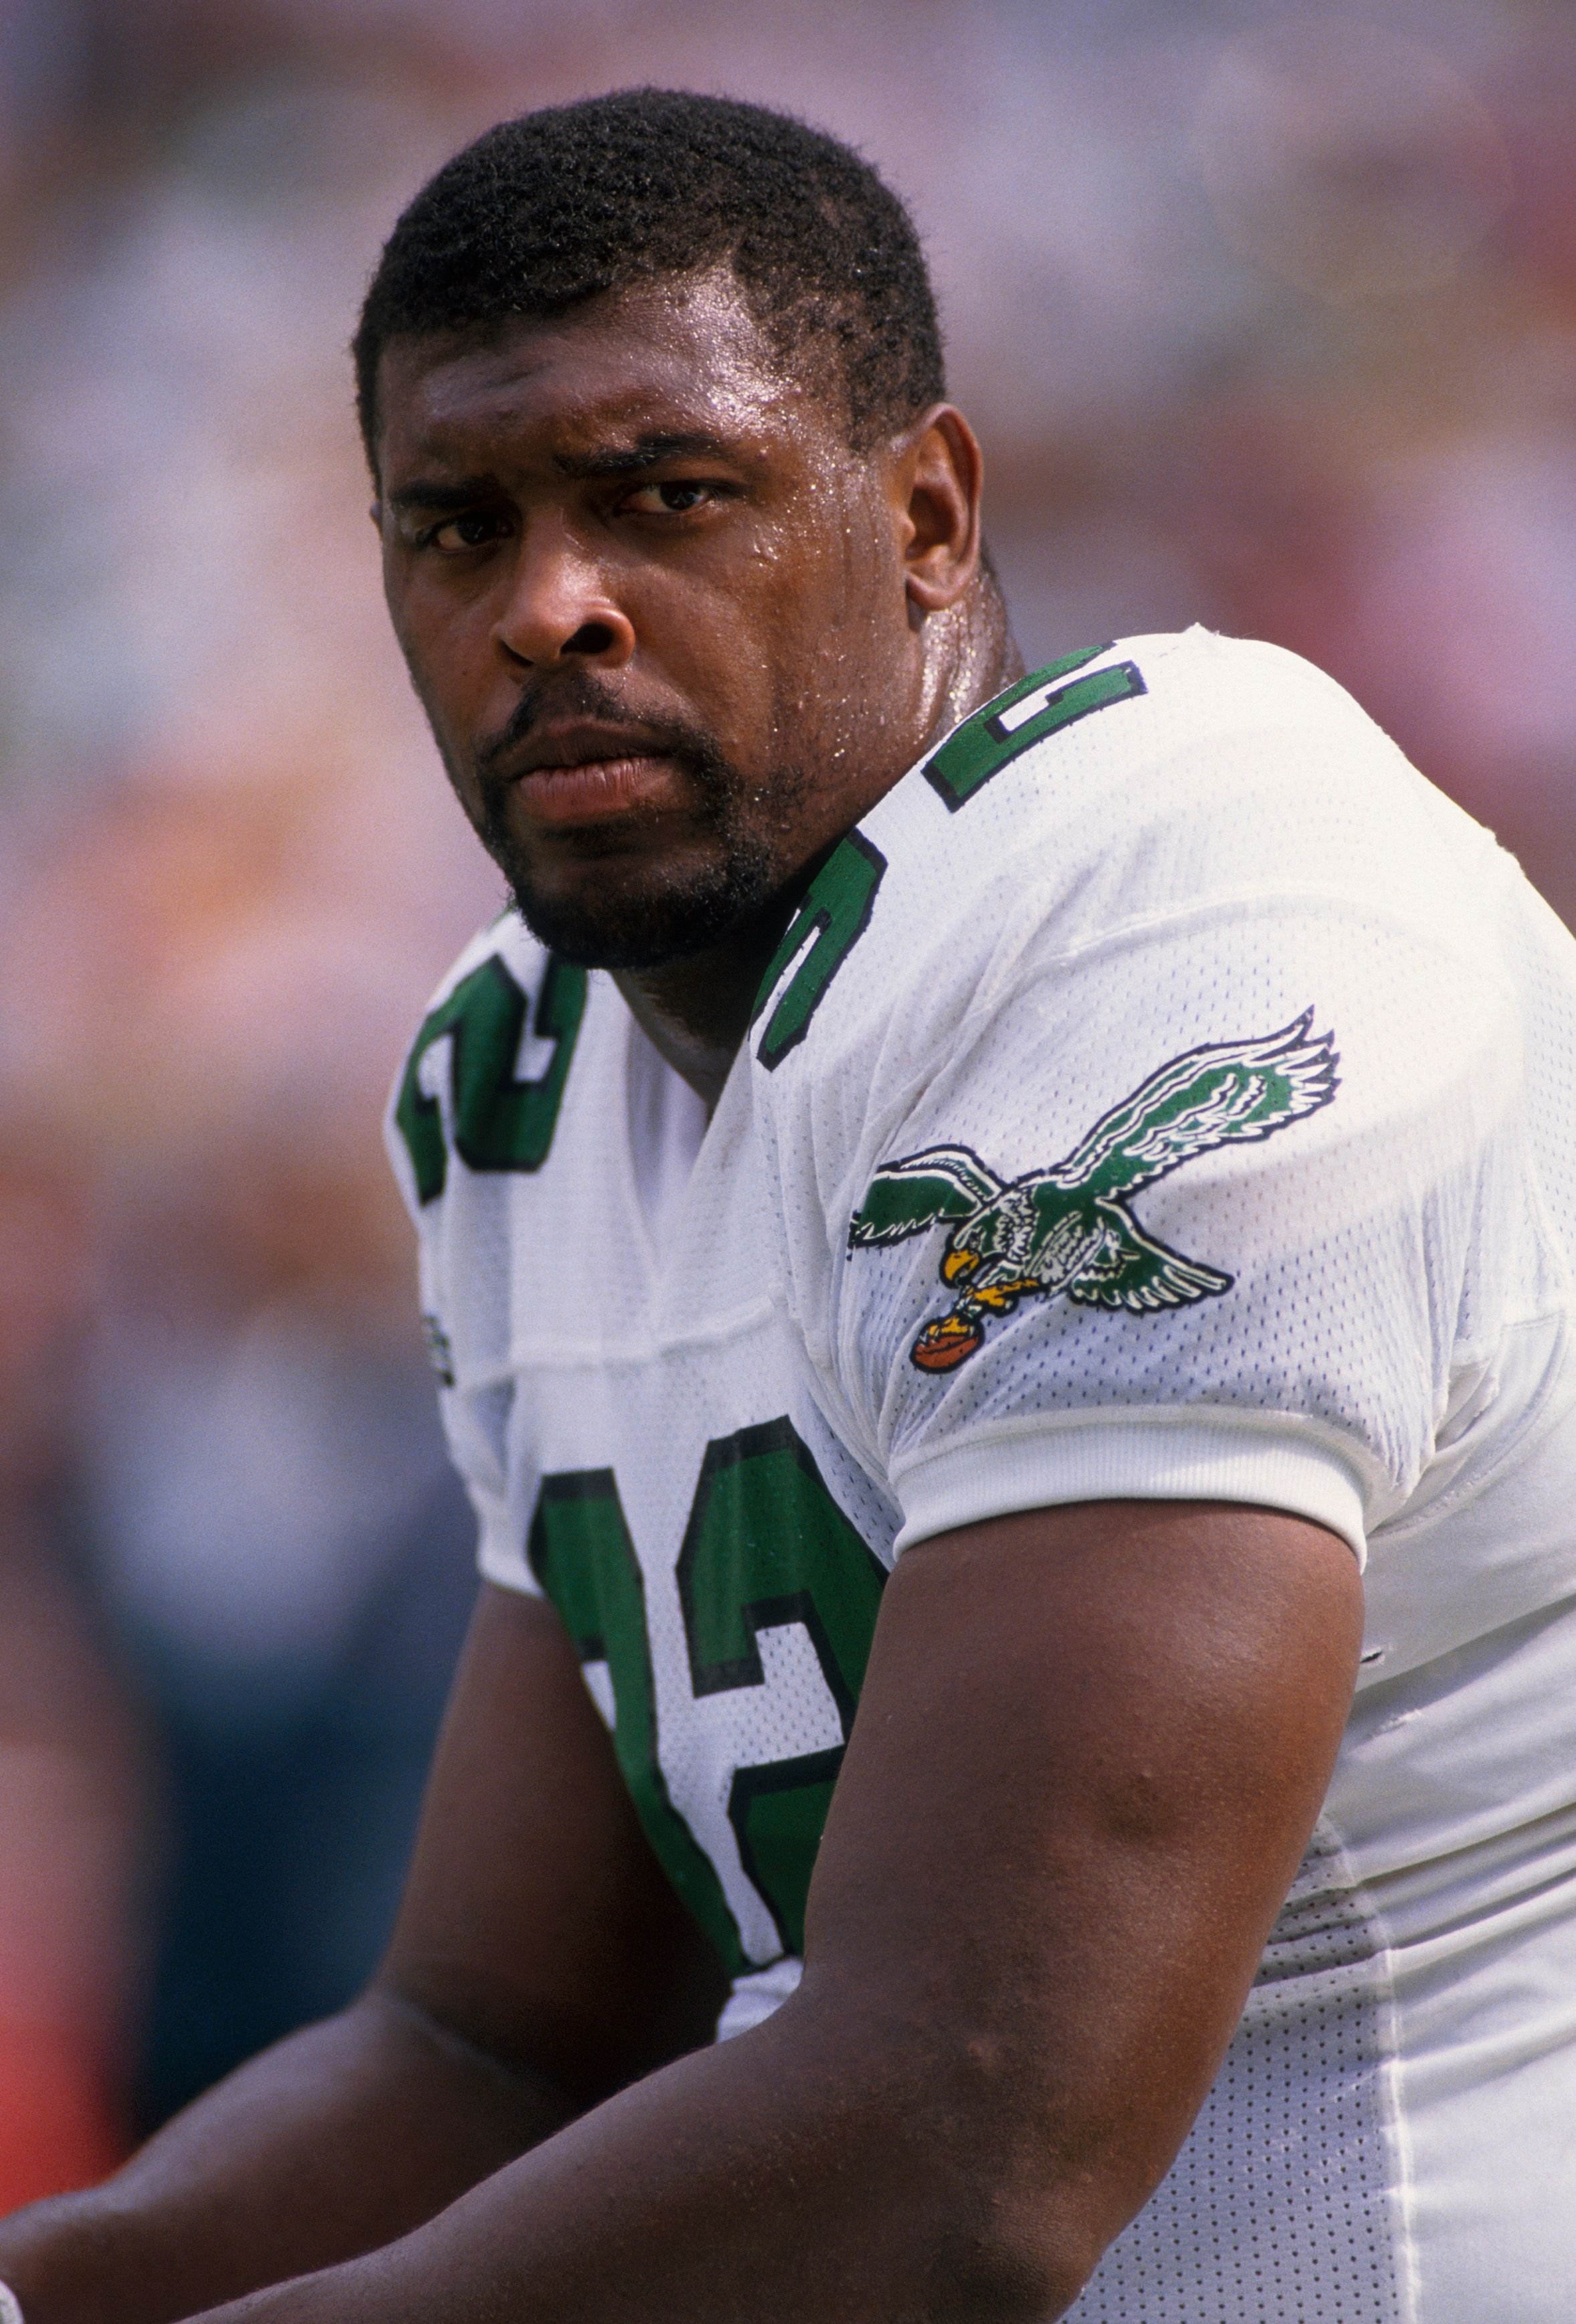 Reggie White #92 sits on the sideline during a game in 1991 at Veterans Stadium in Philadelphia, Pennsylvania. | Source: Getty Images